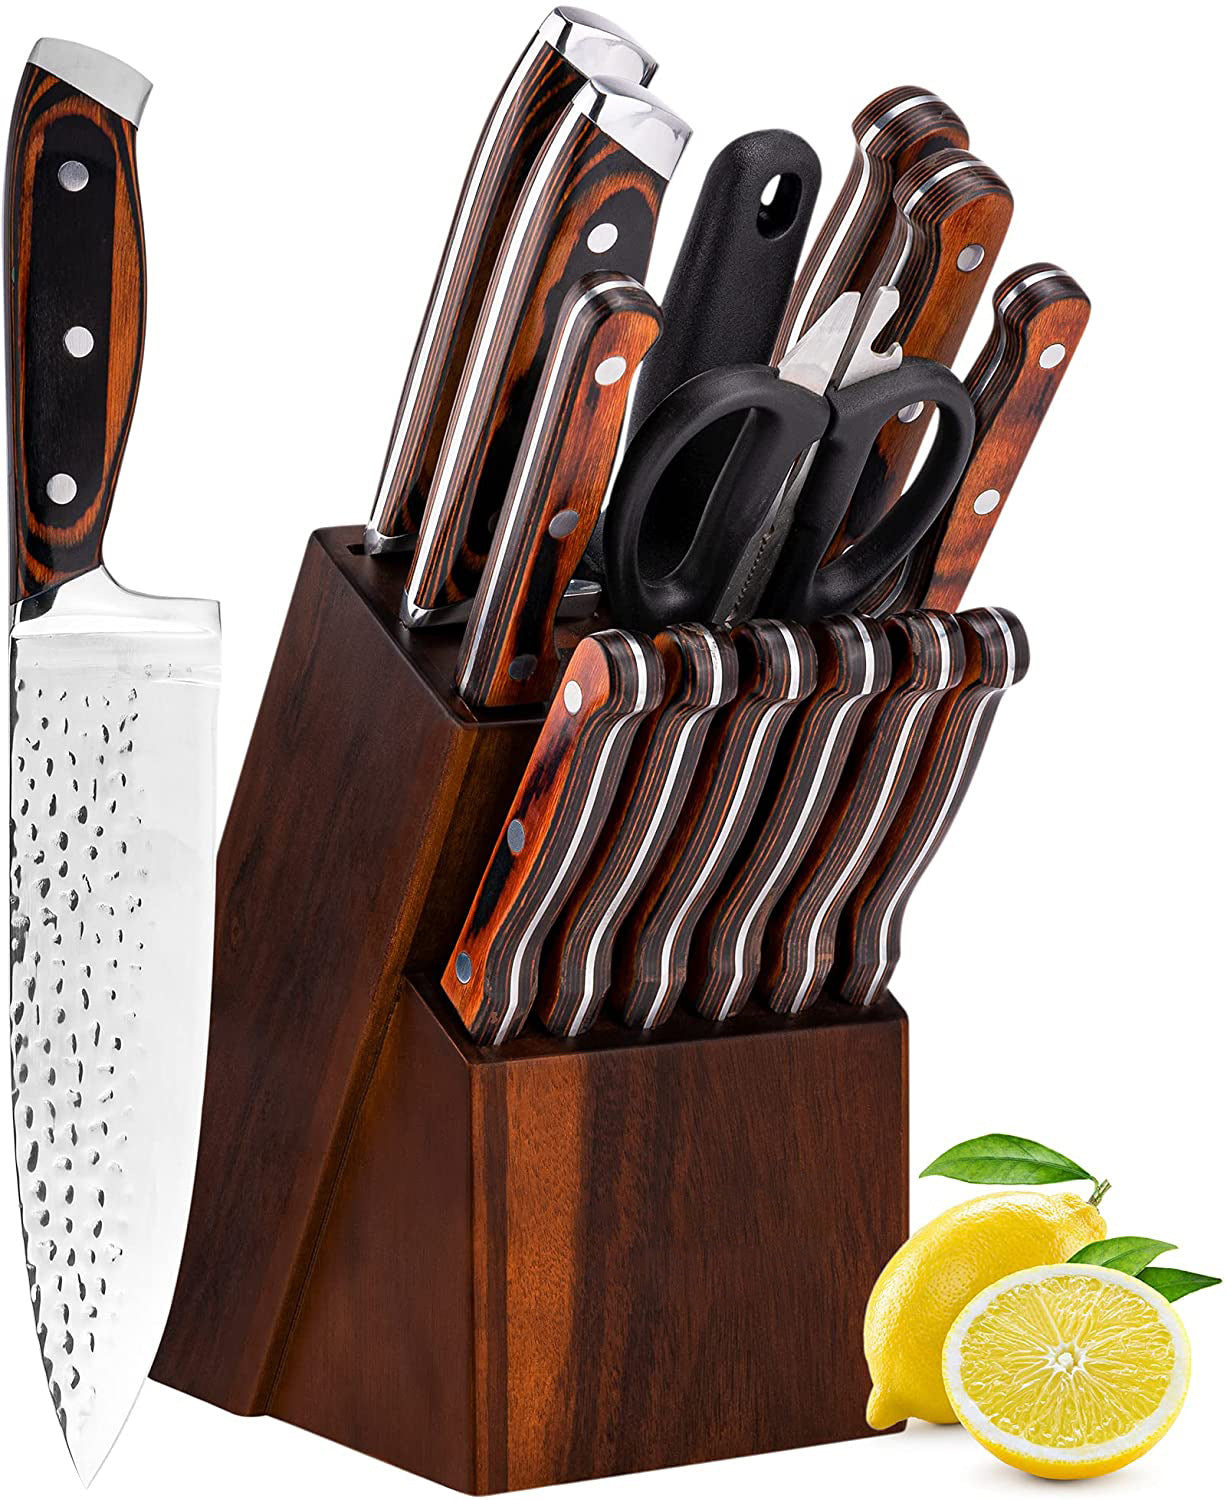 KD Knife Set Of 15 Hammered And Forged Chef's Knives For Domestic Use